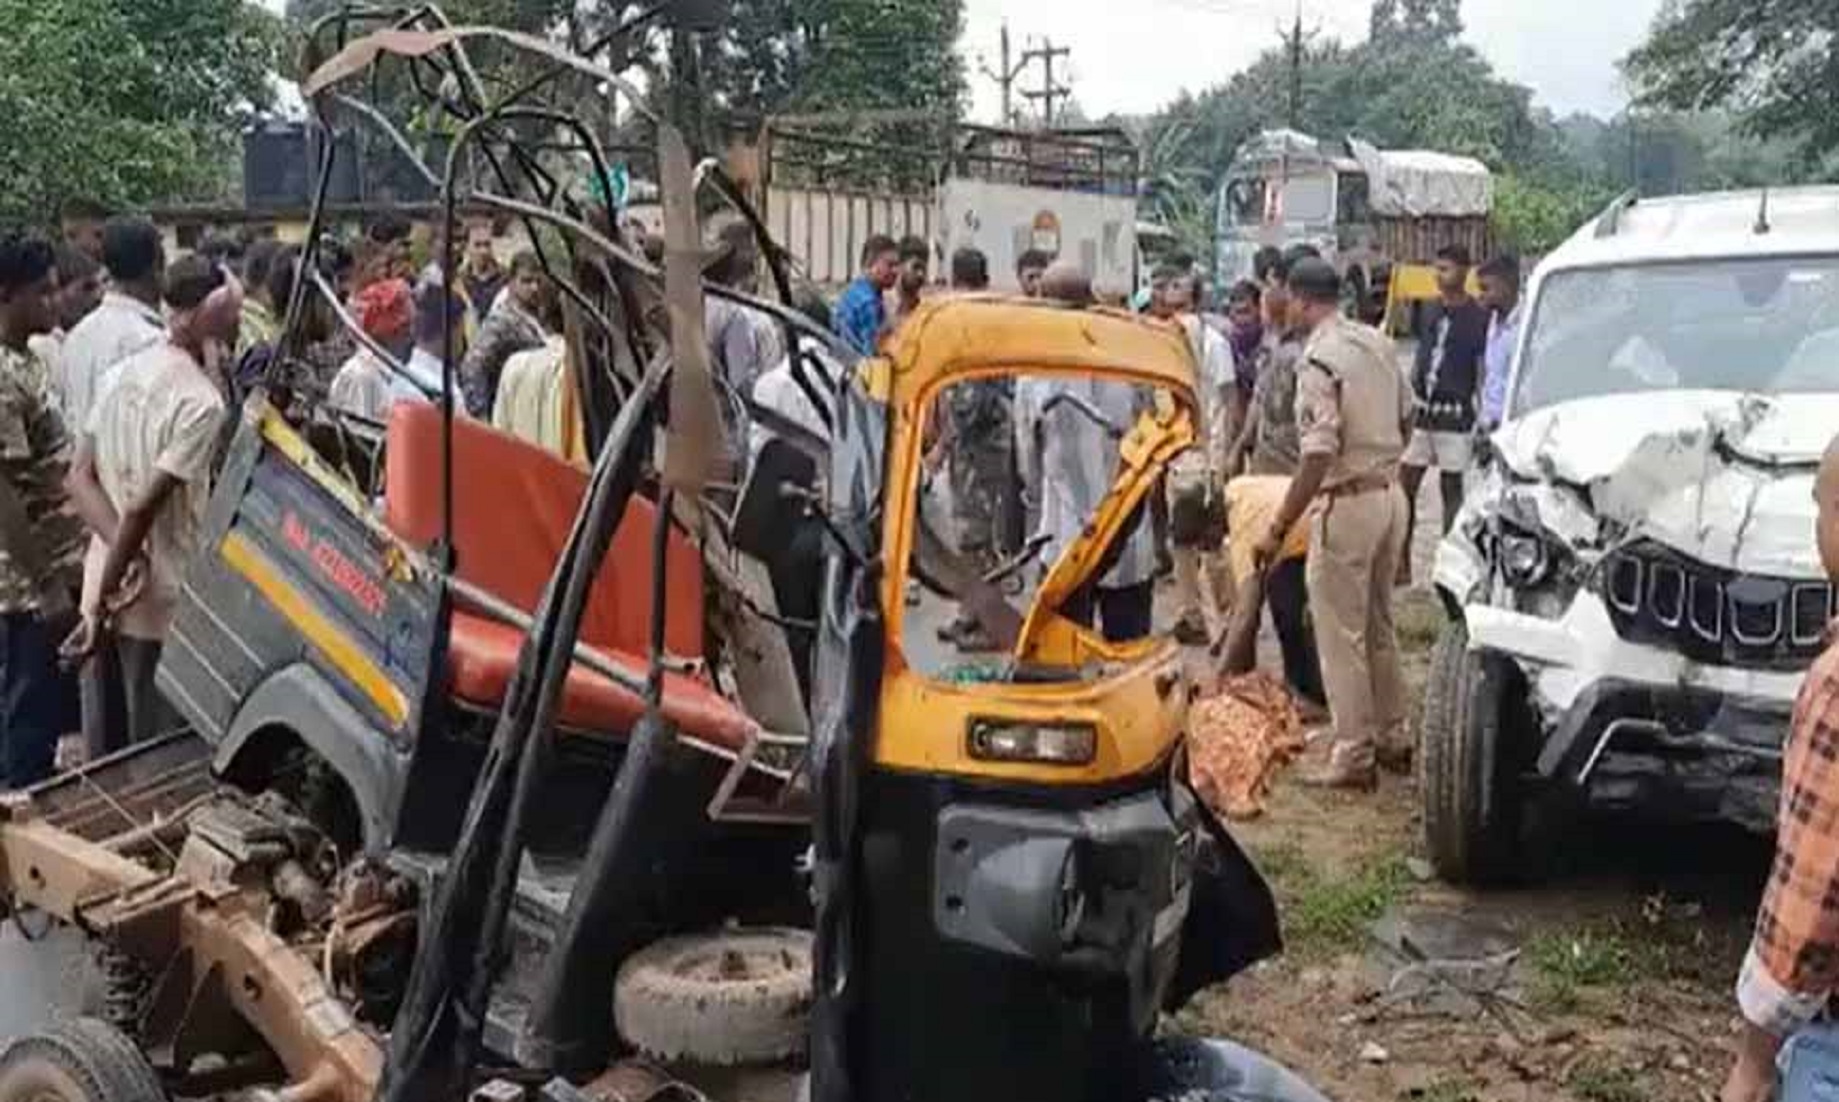 Seven Killed, Eight Injured In Road Accident In India’s Chhattisgarh